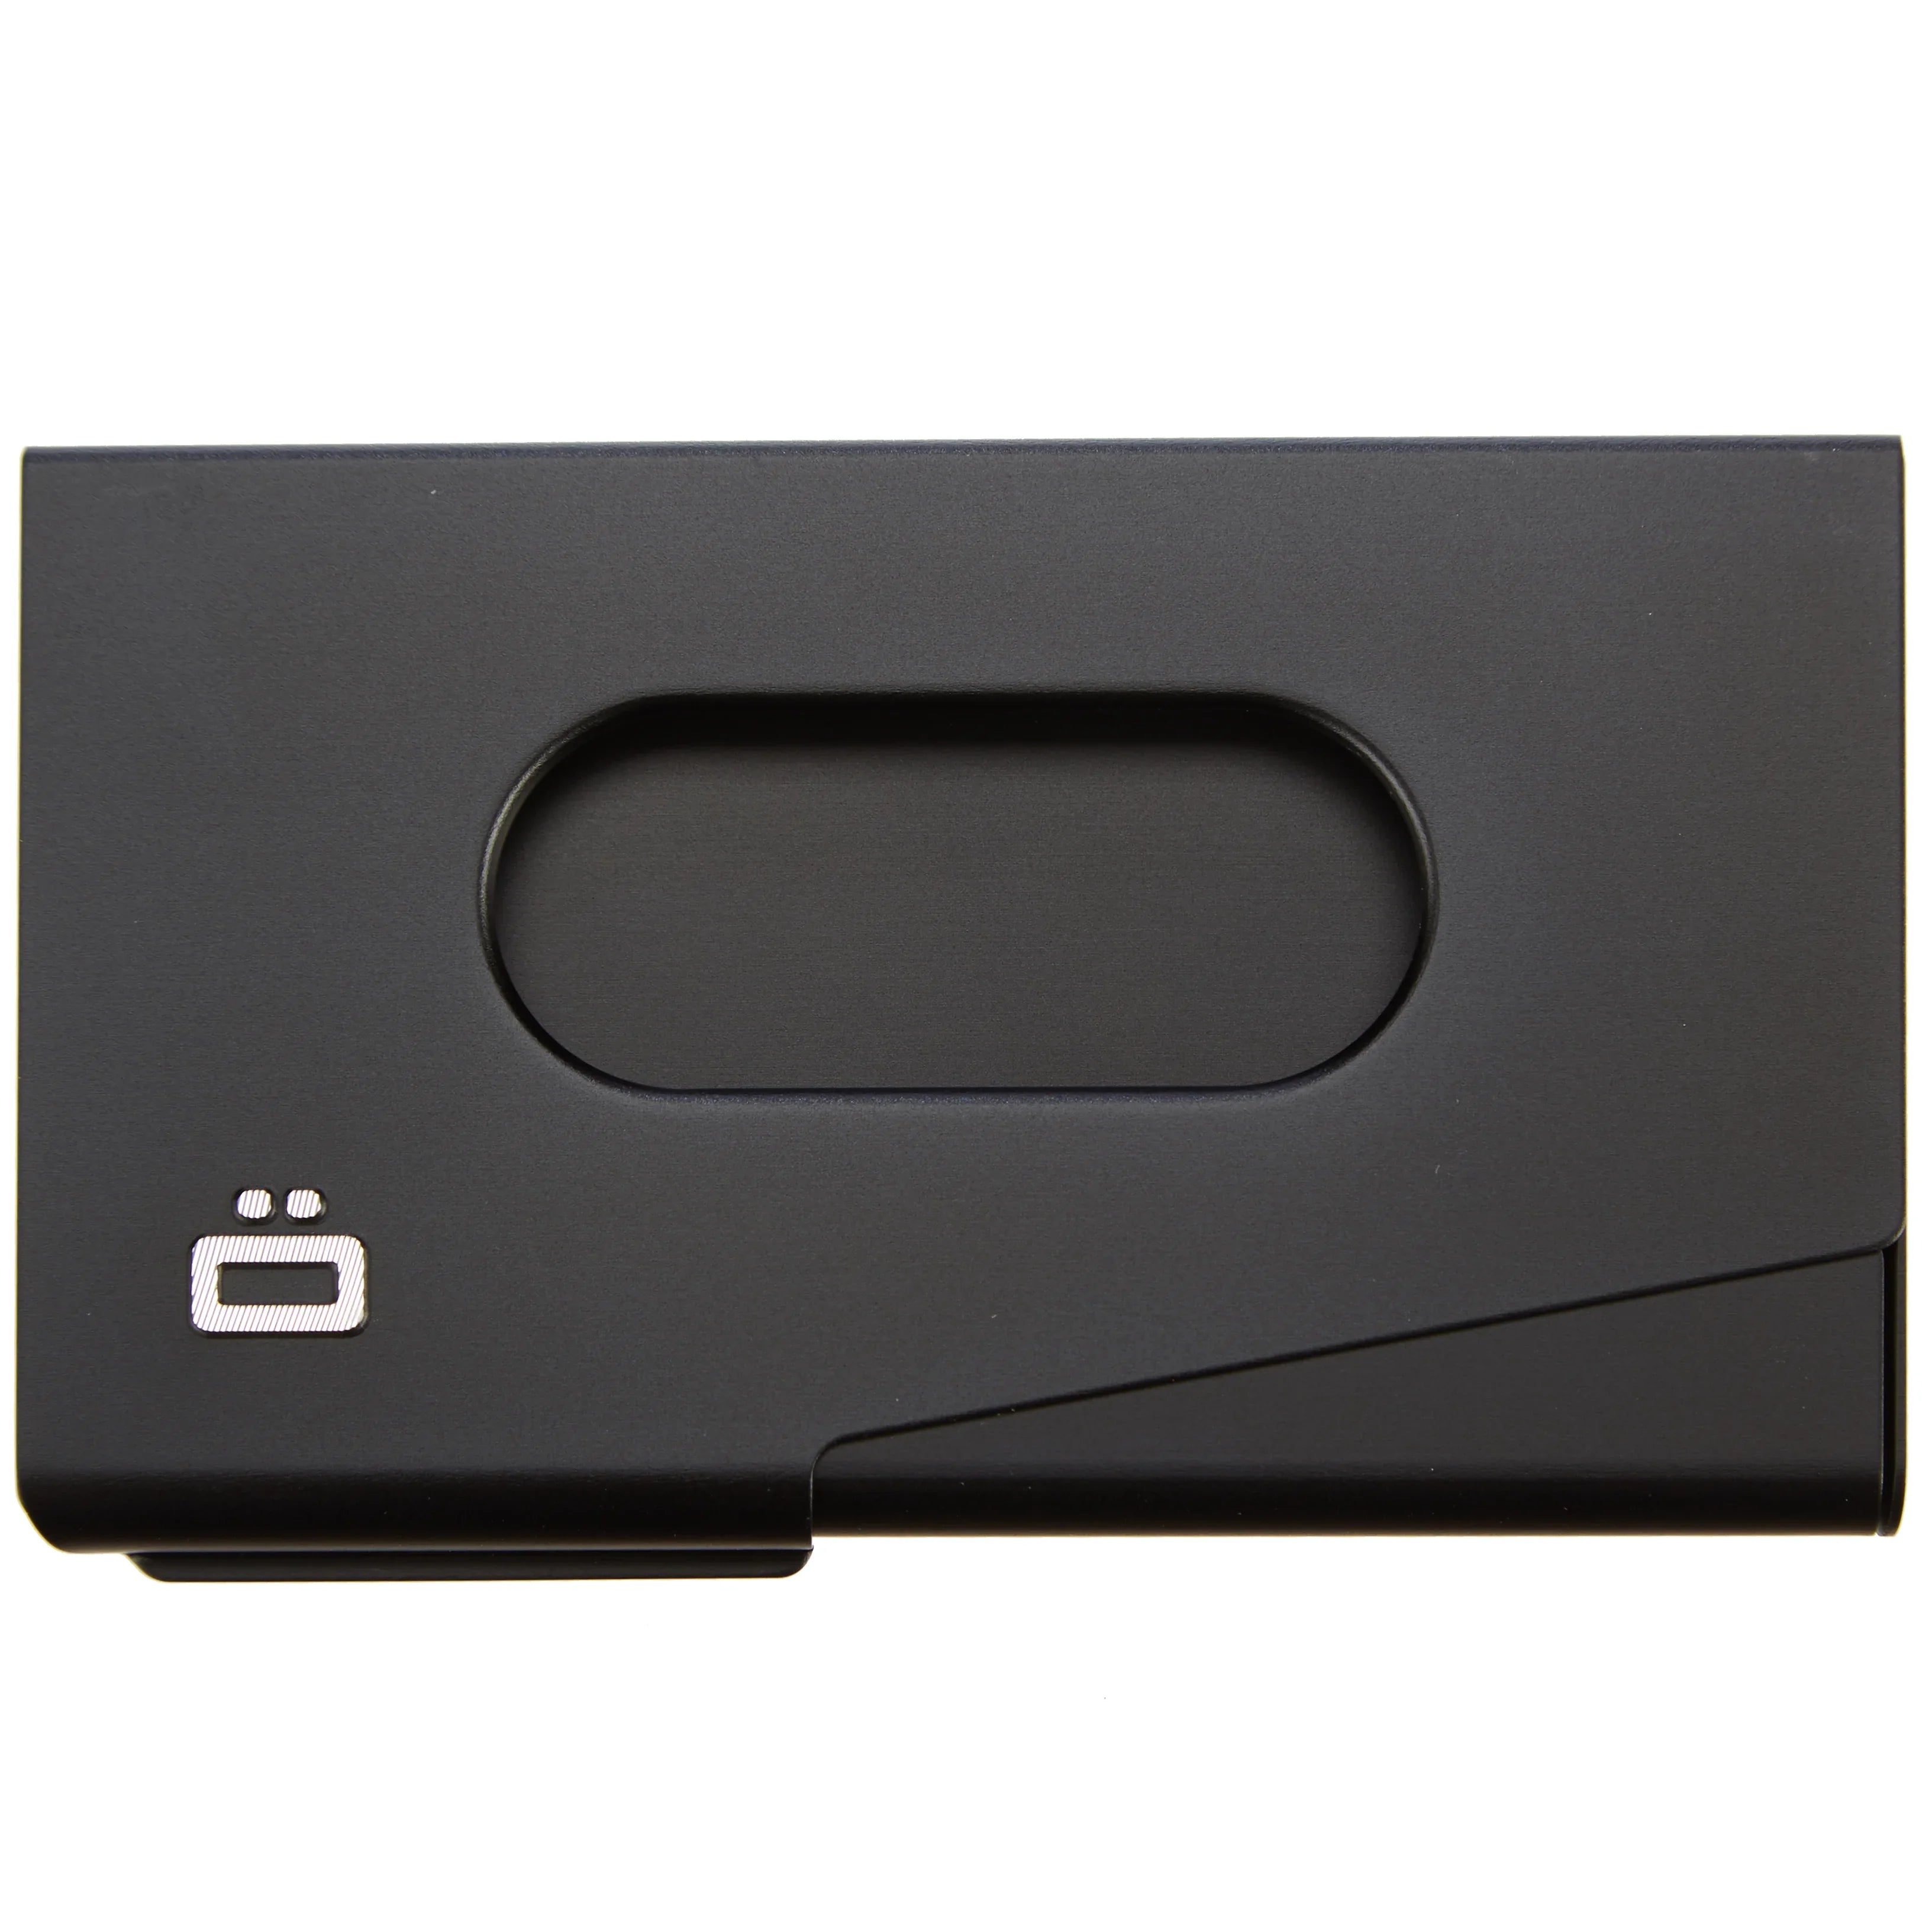 Ögon Designs Wallets Innovations One Touch business card holder 10 cm - black